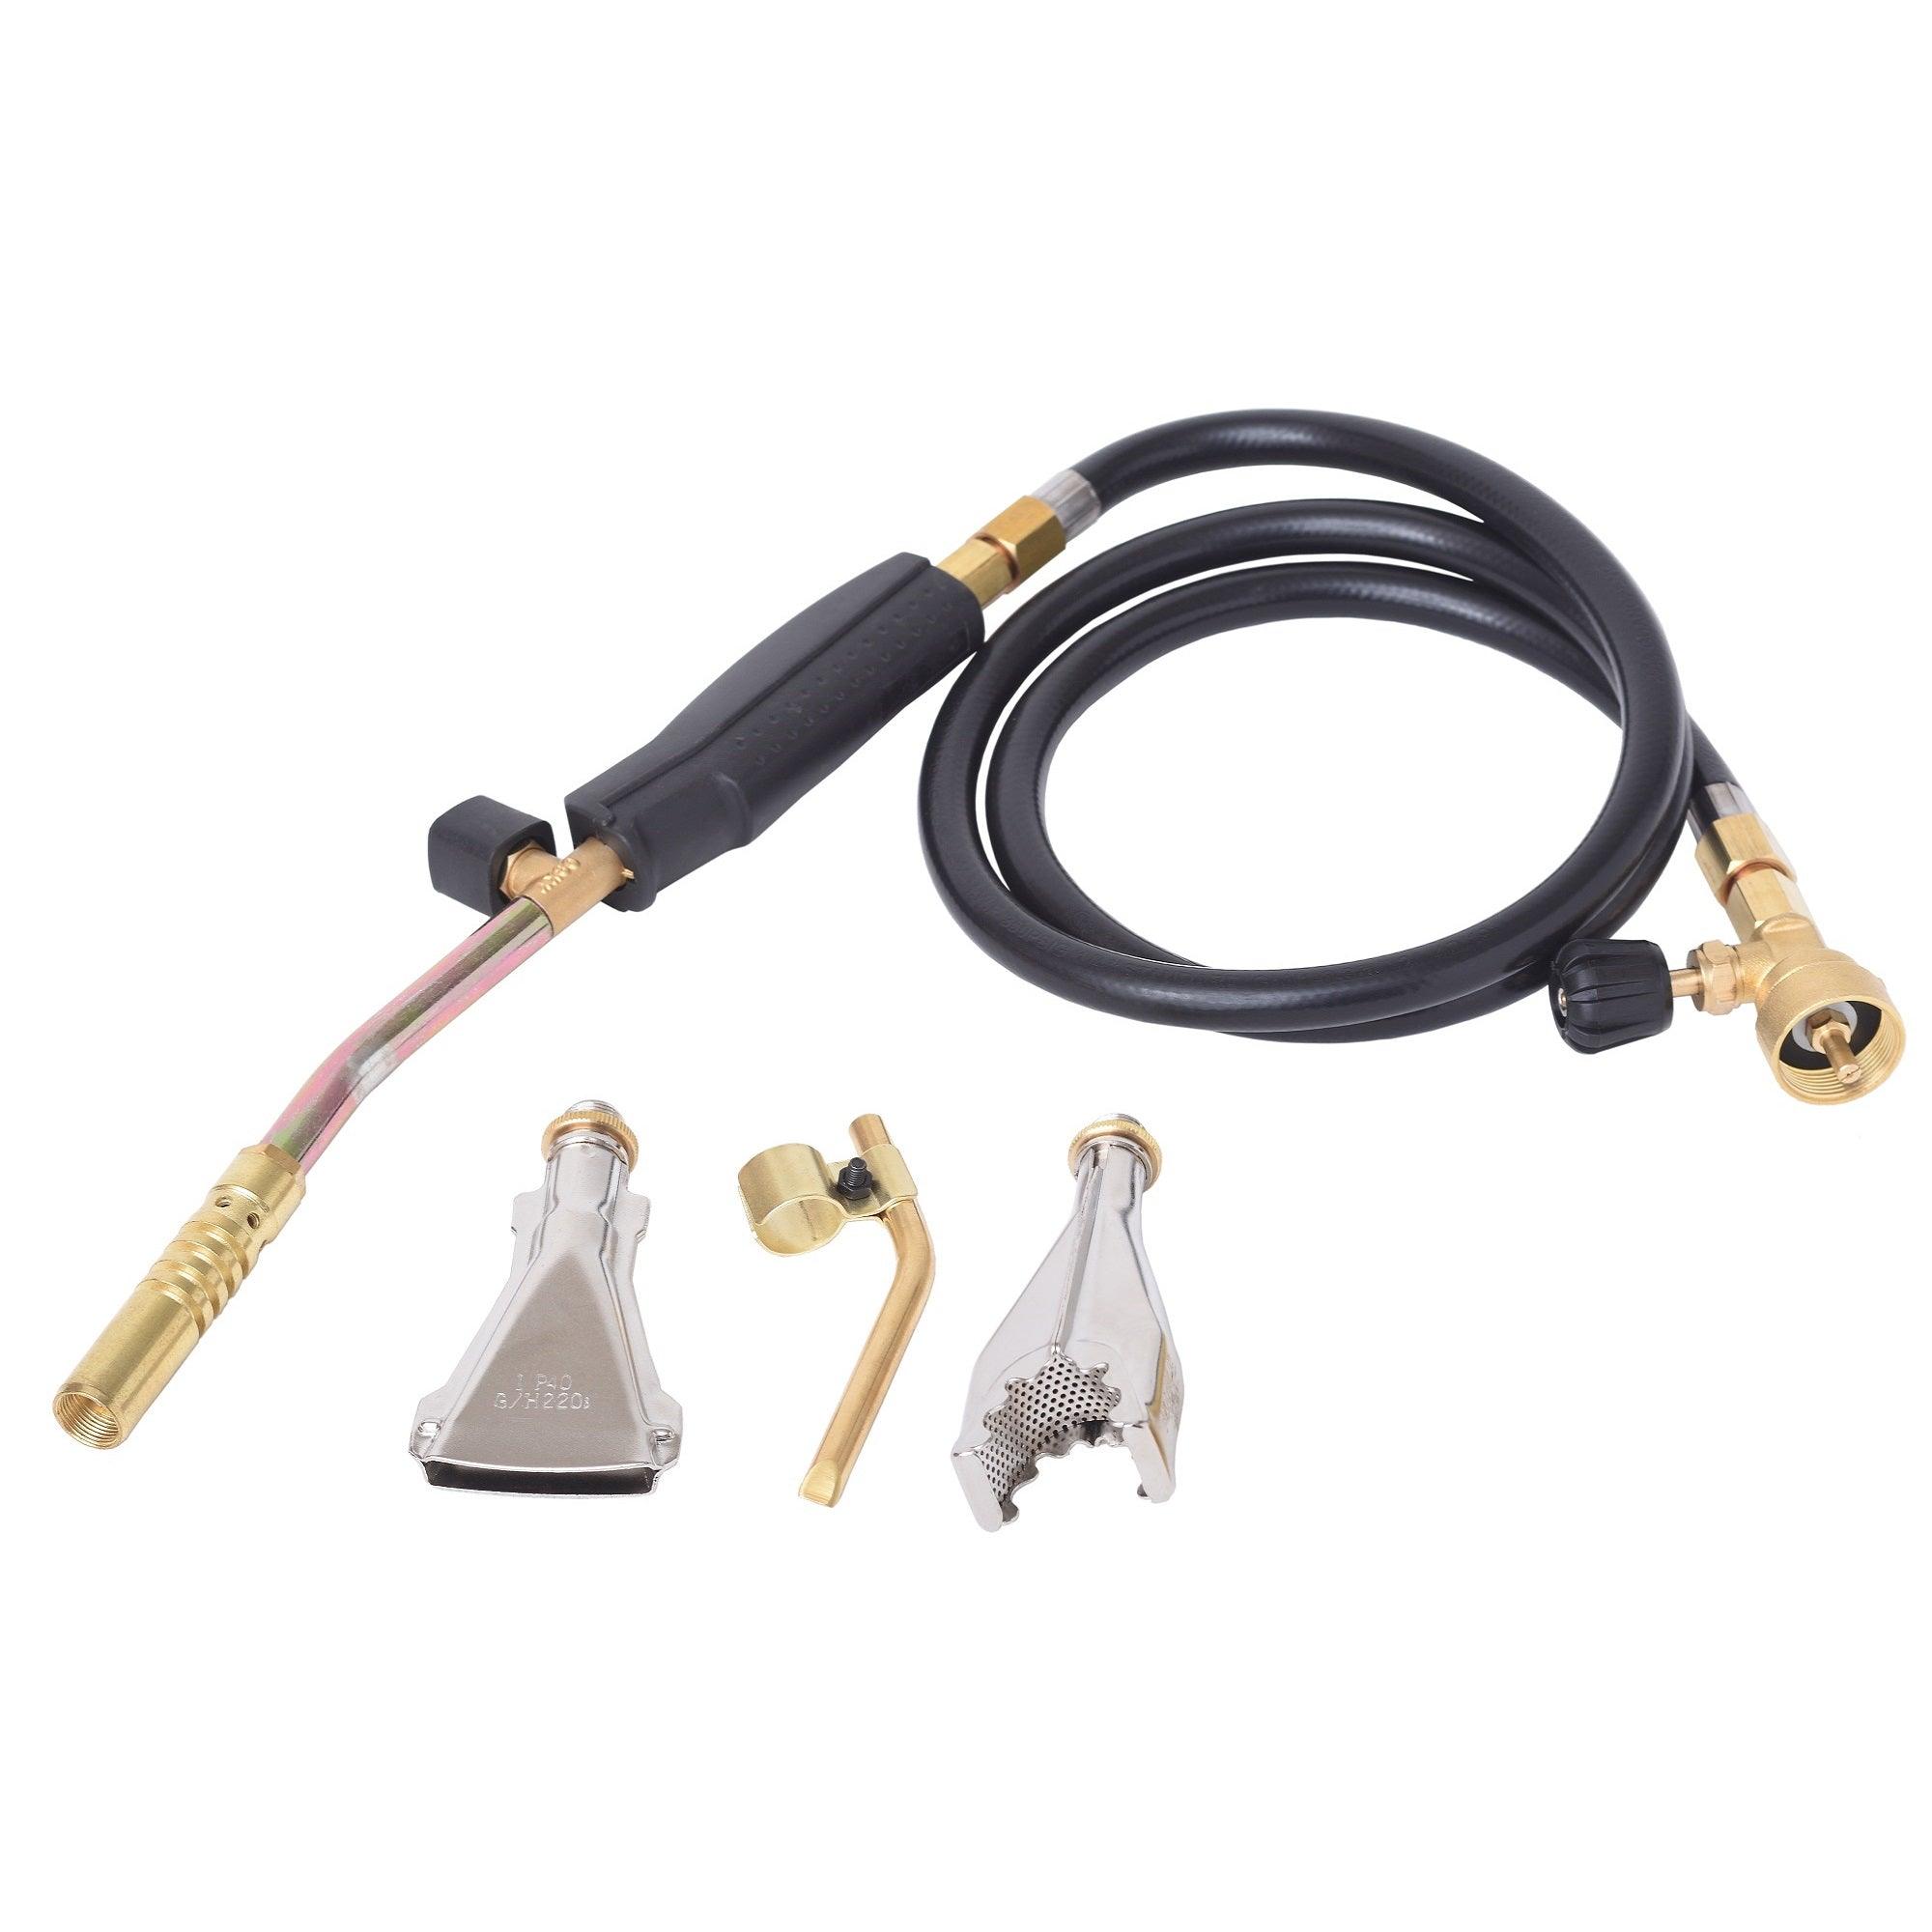 Flame King Propane Torch with 3 Interchangeable Tips - Flame King